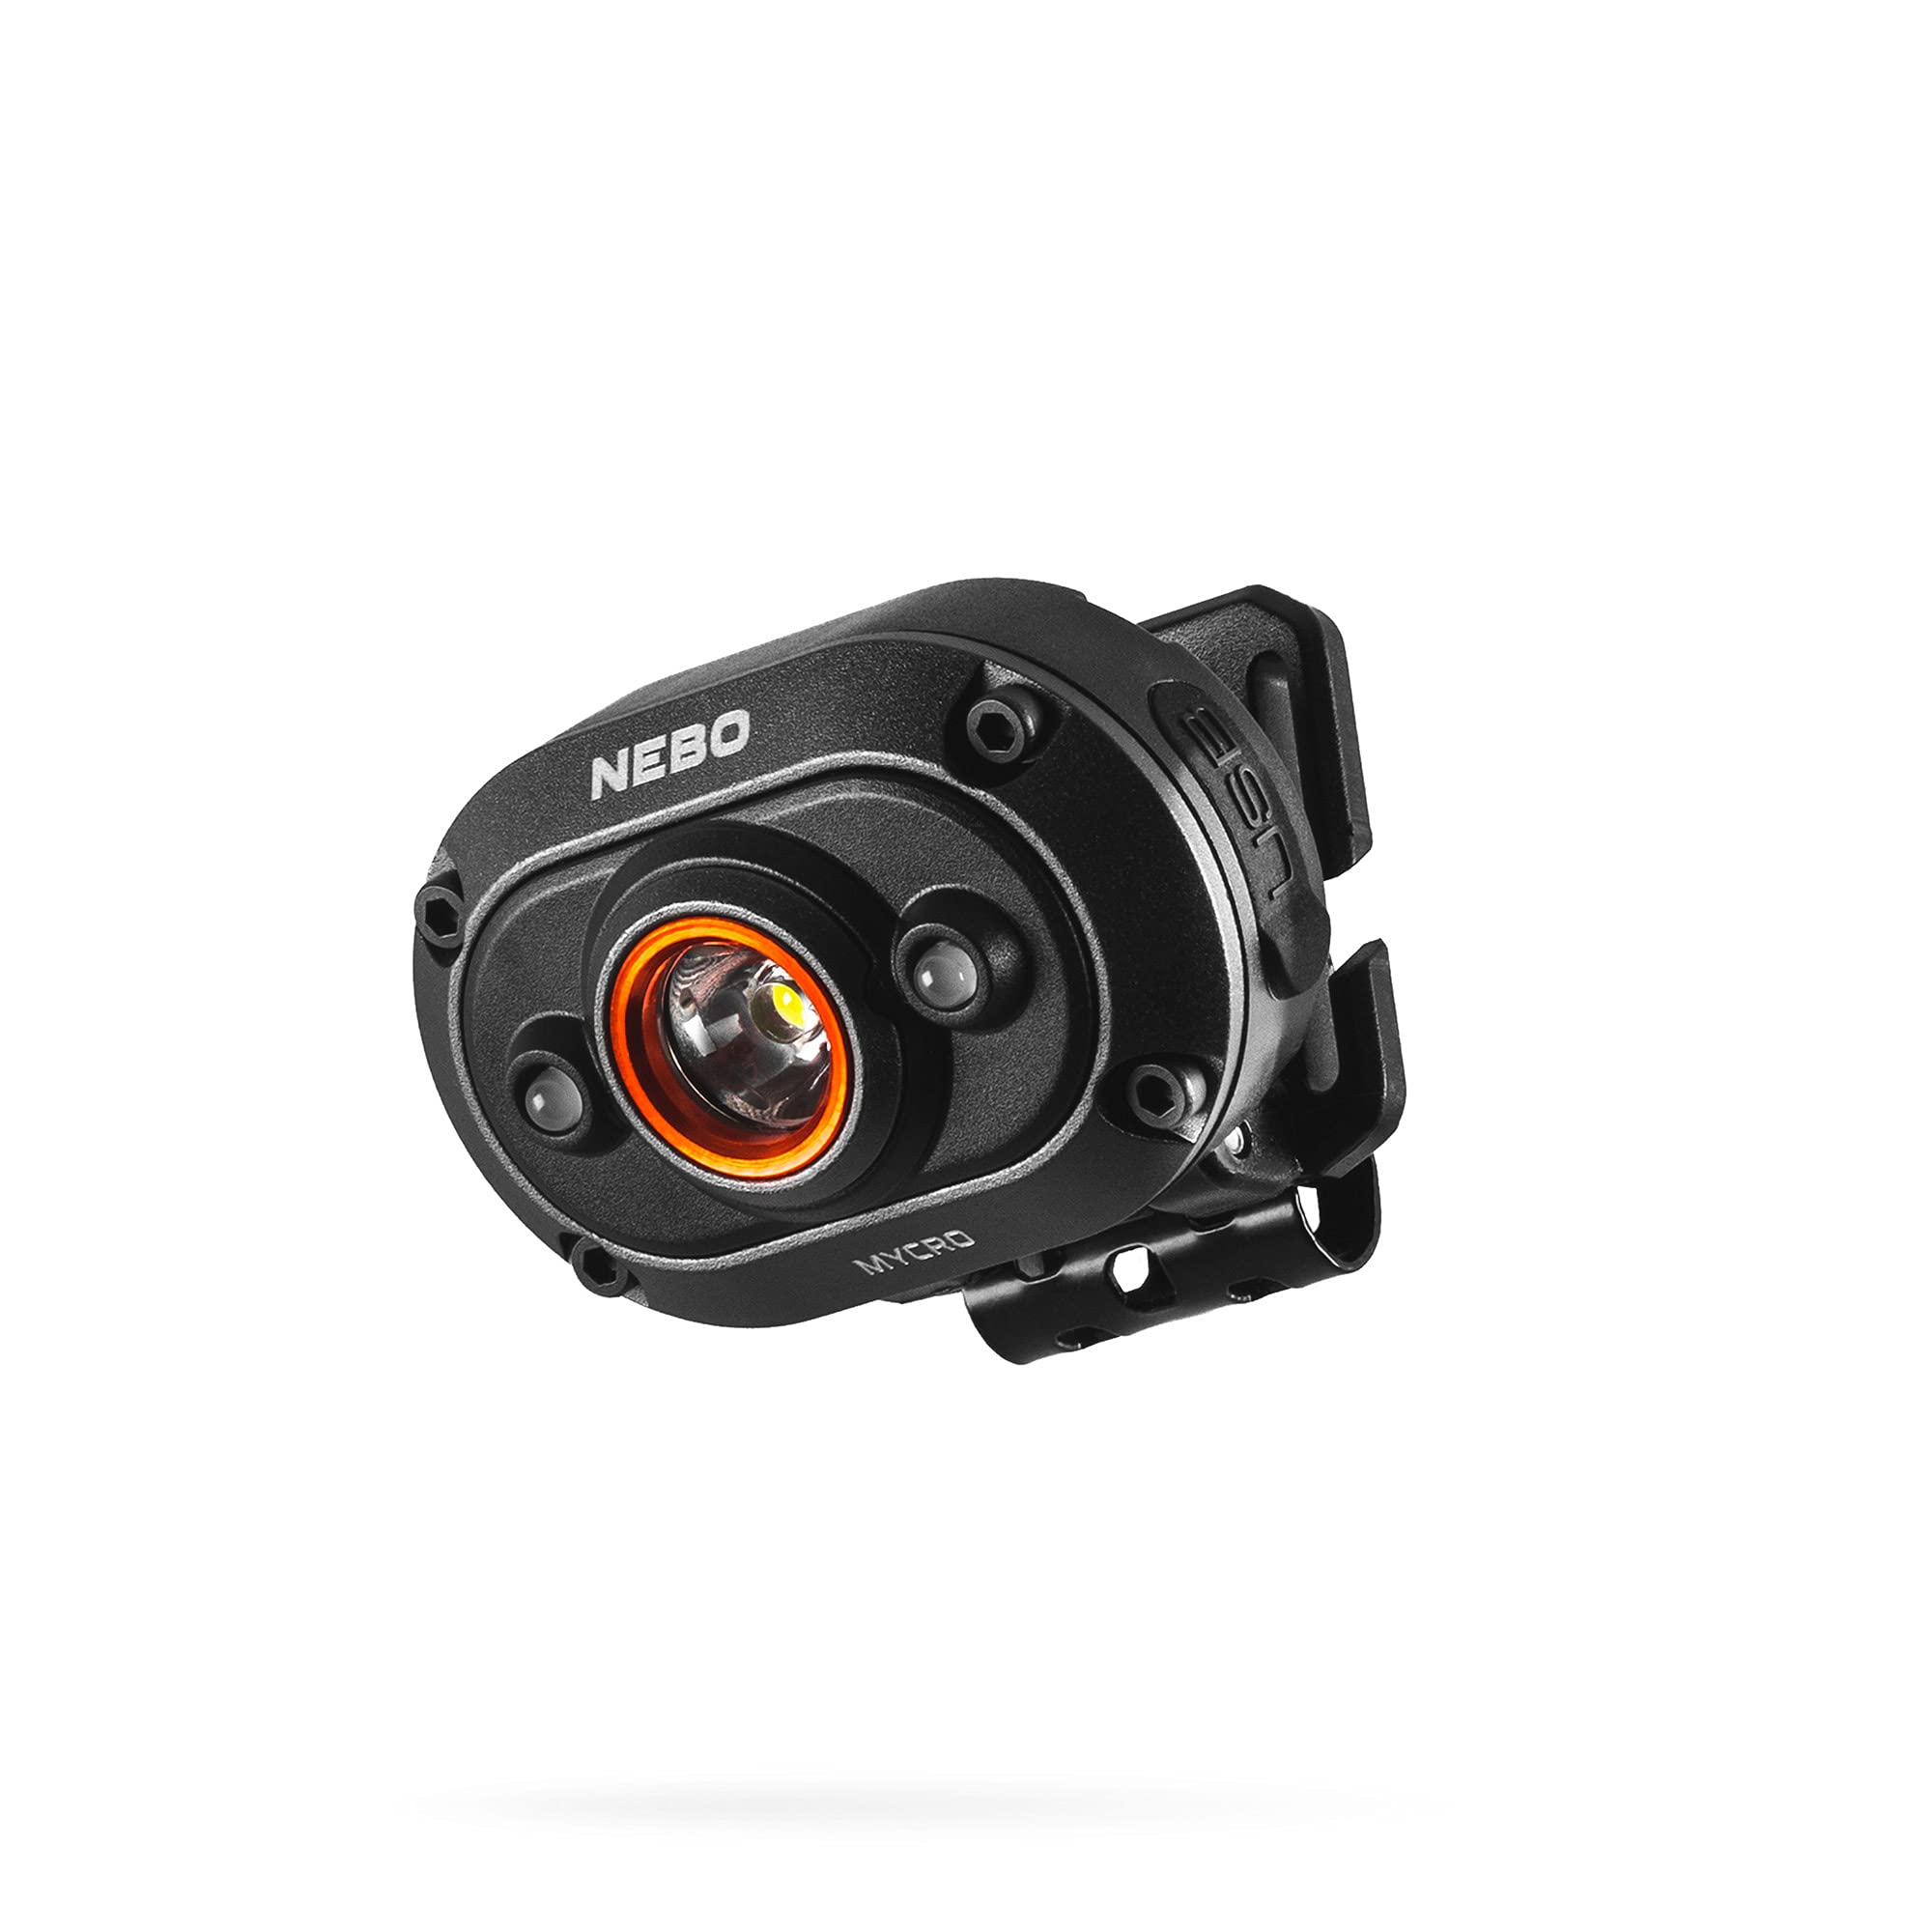 NEBO MYCRO Headlamp, Fully Rechargeable, Hands Free, Powerful 400 Lumen Torch, 6 Light Modes, Water and Impact Resistant